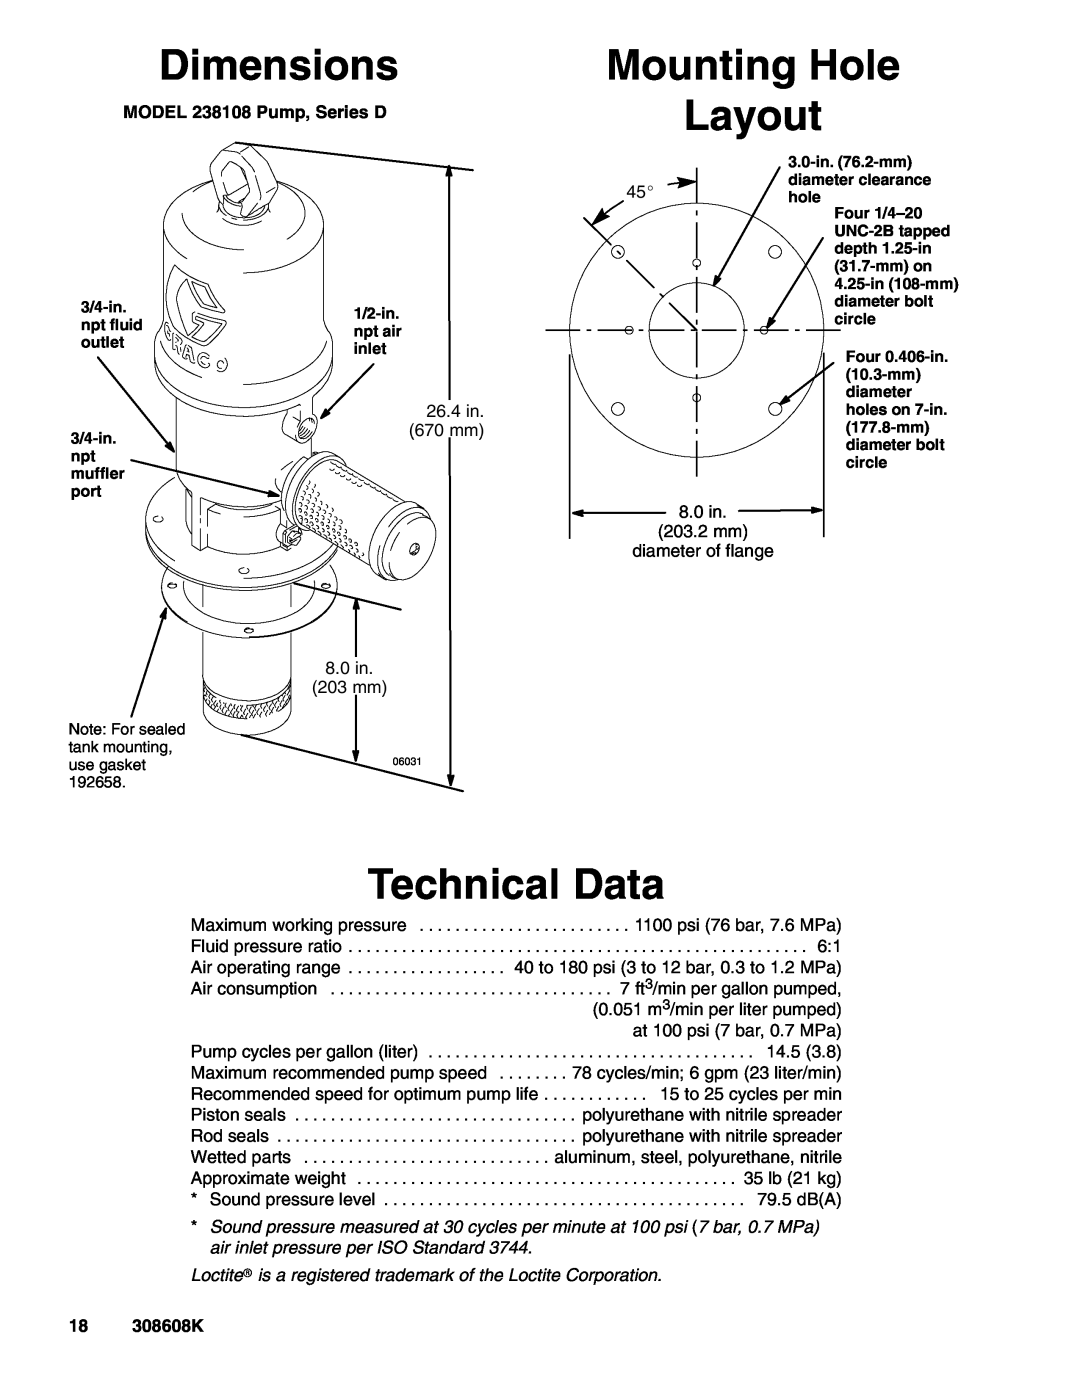 Graco Dimensions, Mounting Hole Layout, Technical Data, MODEL 238108 Pump, Series D, 18 308608K 